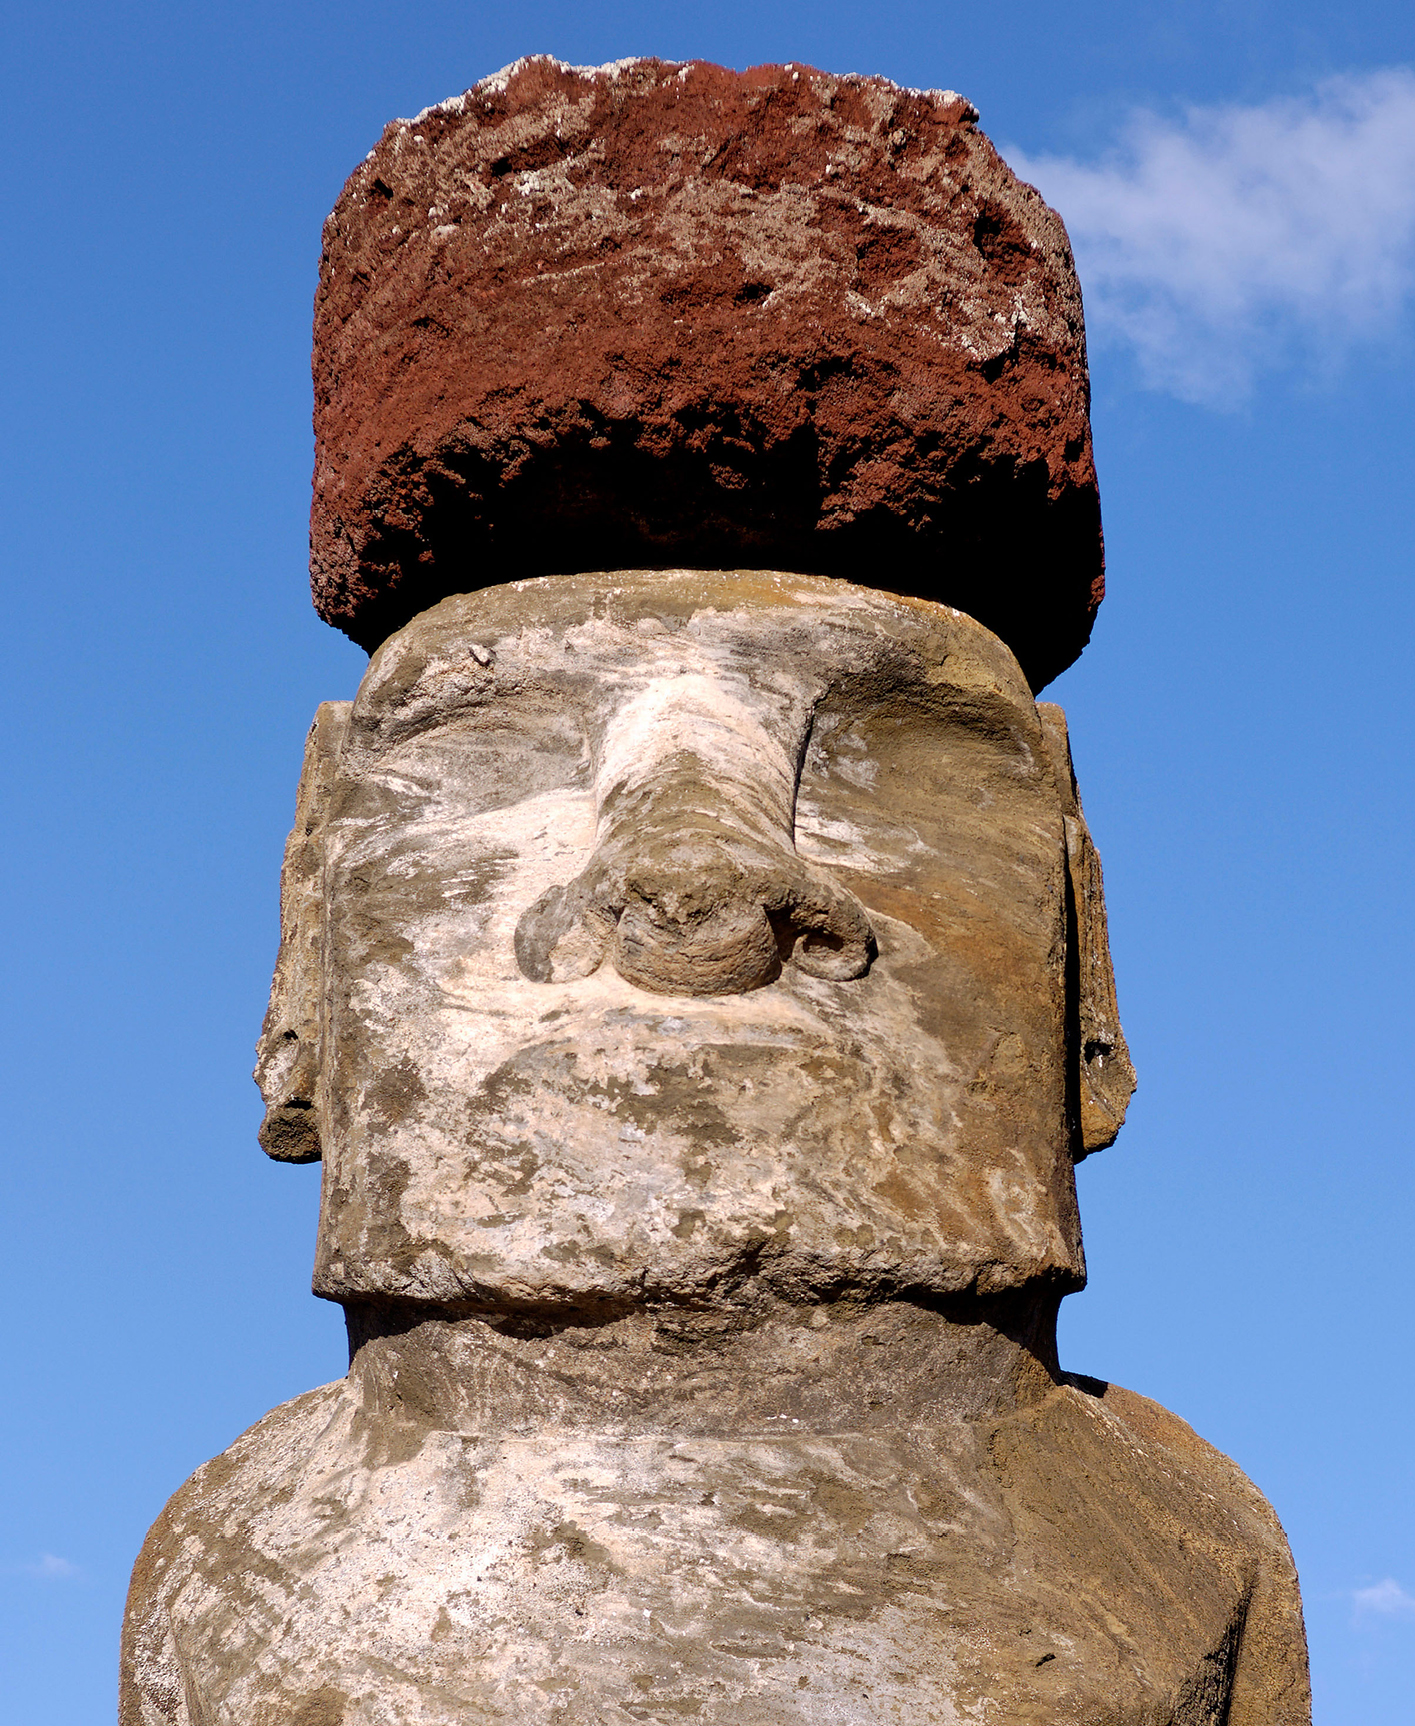 One of the Ahu Tongariki Fifteen, a collection of 15 ceremonial stone moai that make up the largest monument on Easter Island